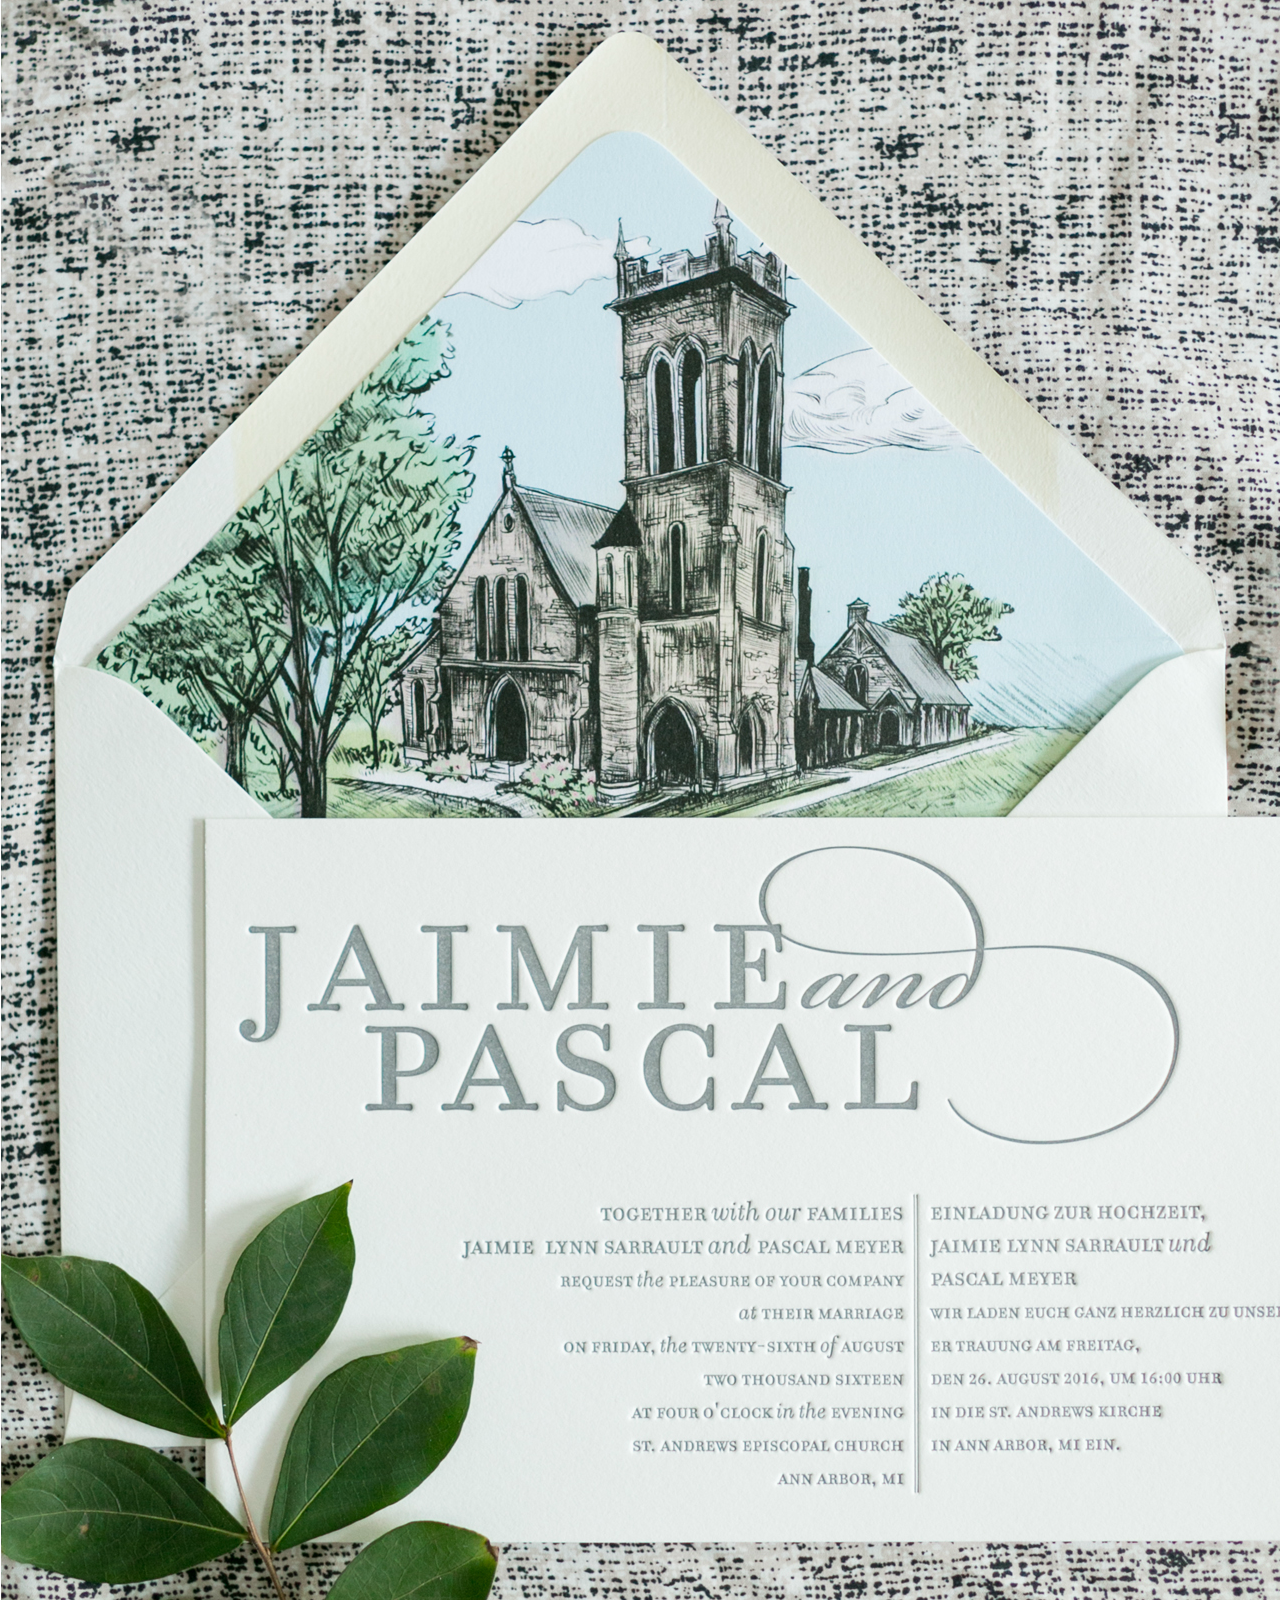 Bilingual Wedding Invitations with a Beautiful Illustrated Envelope Liner by Atheneum Creative